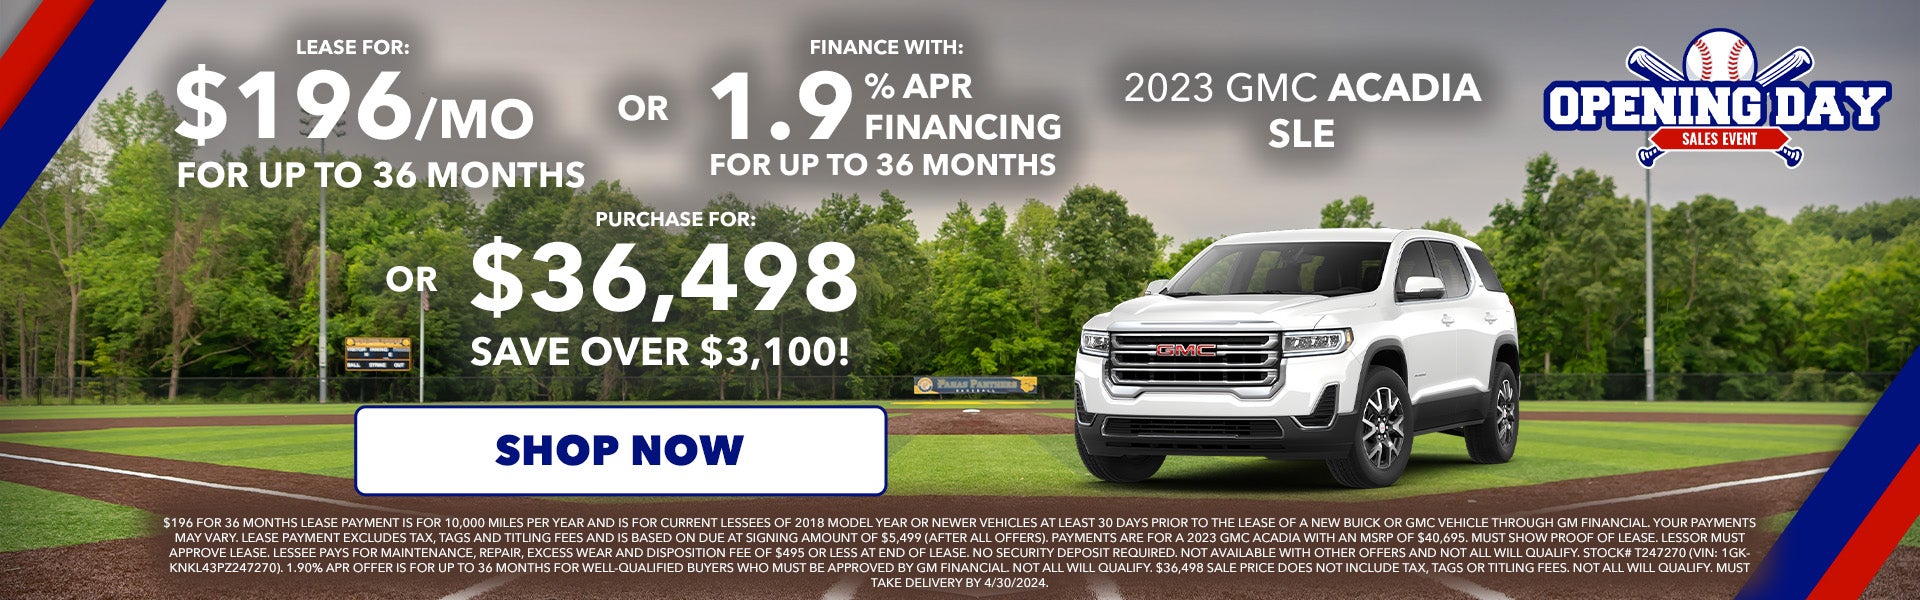 2023 GMC Acadia Lease, Finance & Purchase Specials